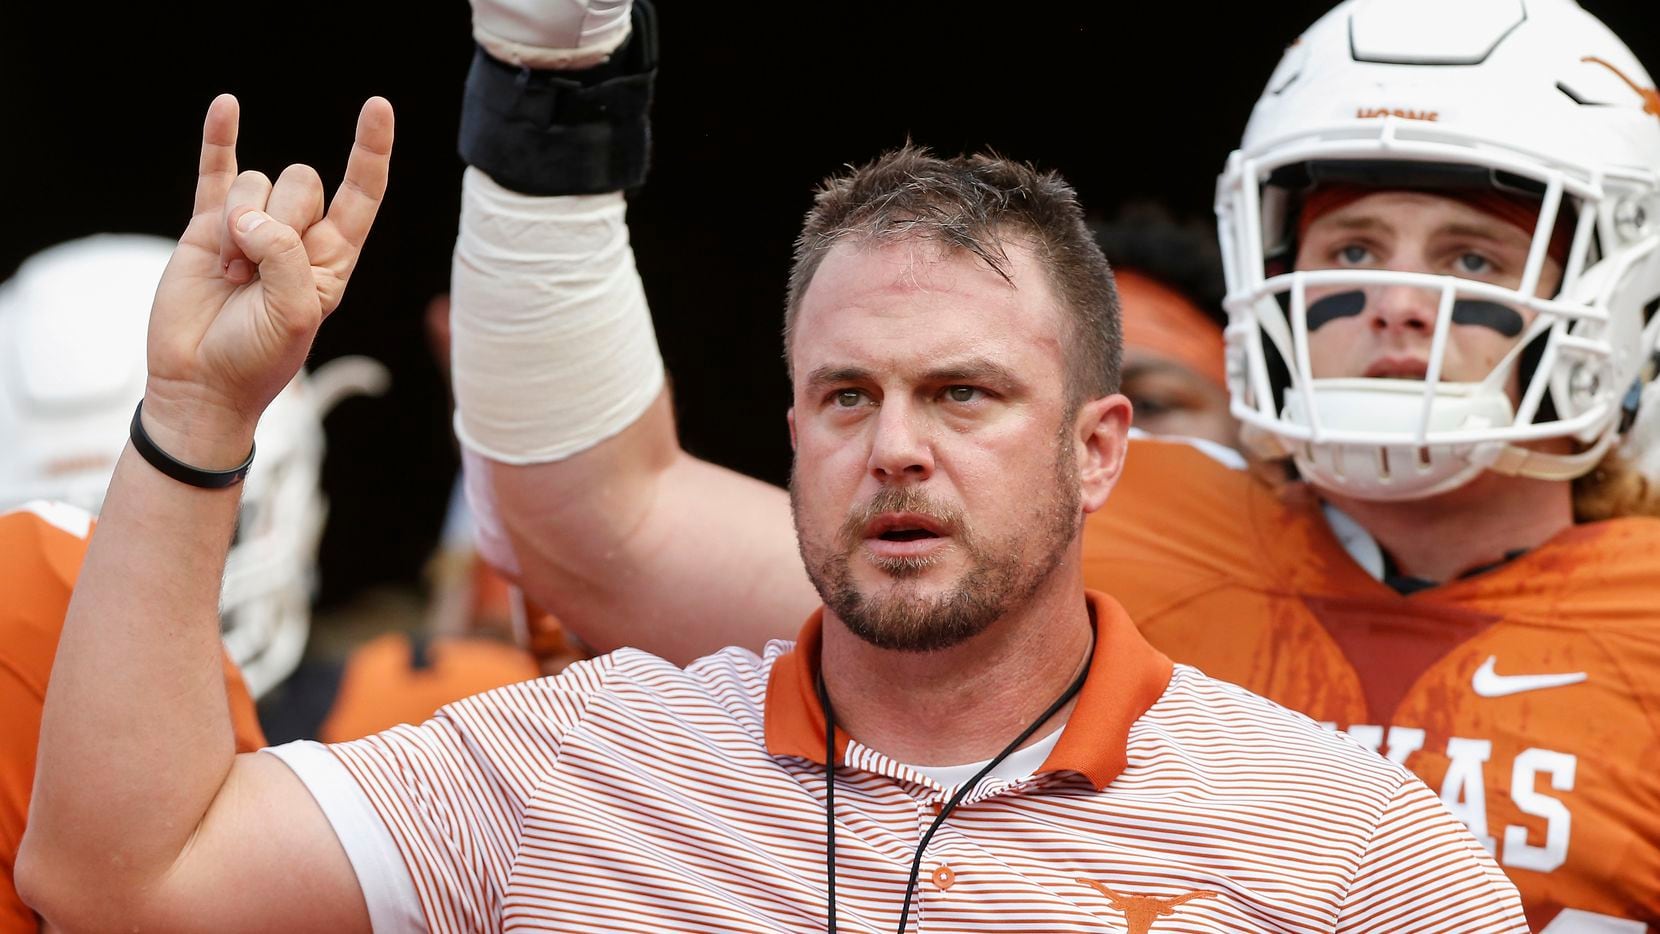 Head coach Tom Herman of the Texas Longhorns leads the team on to the field before the Orange-White Spring Game at Darrell K Royal-Texas Memorial Stadium on April 21, 2018 in Austin, Texas.